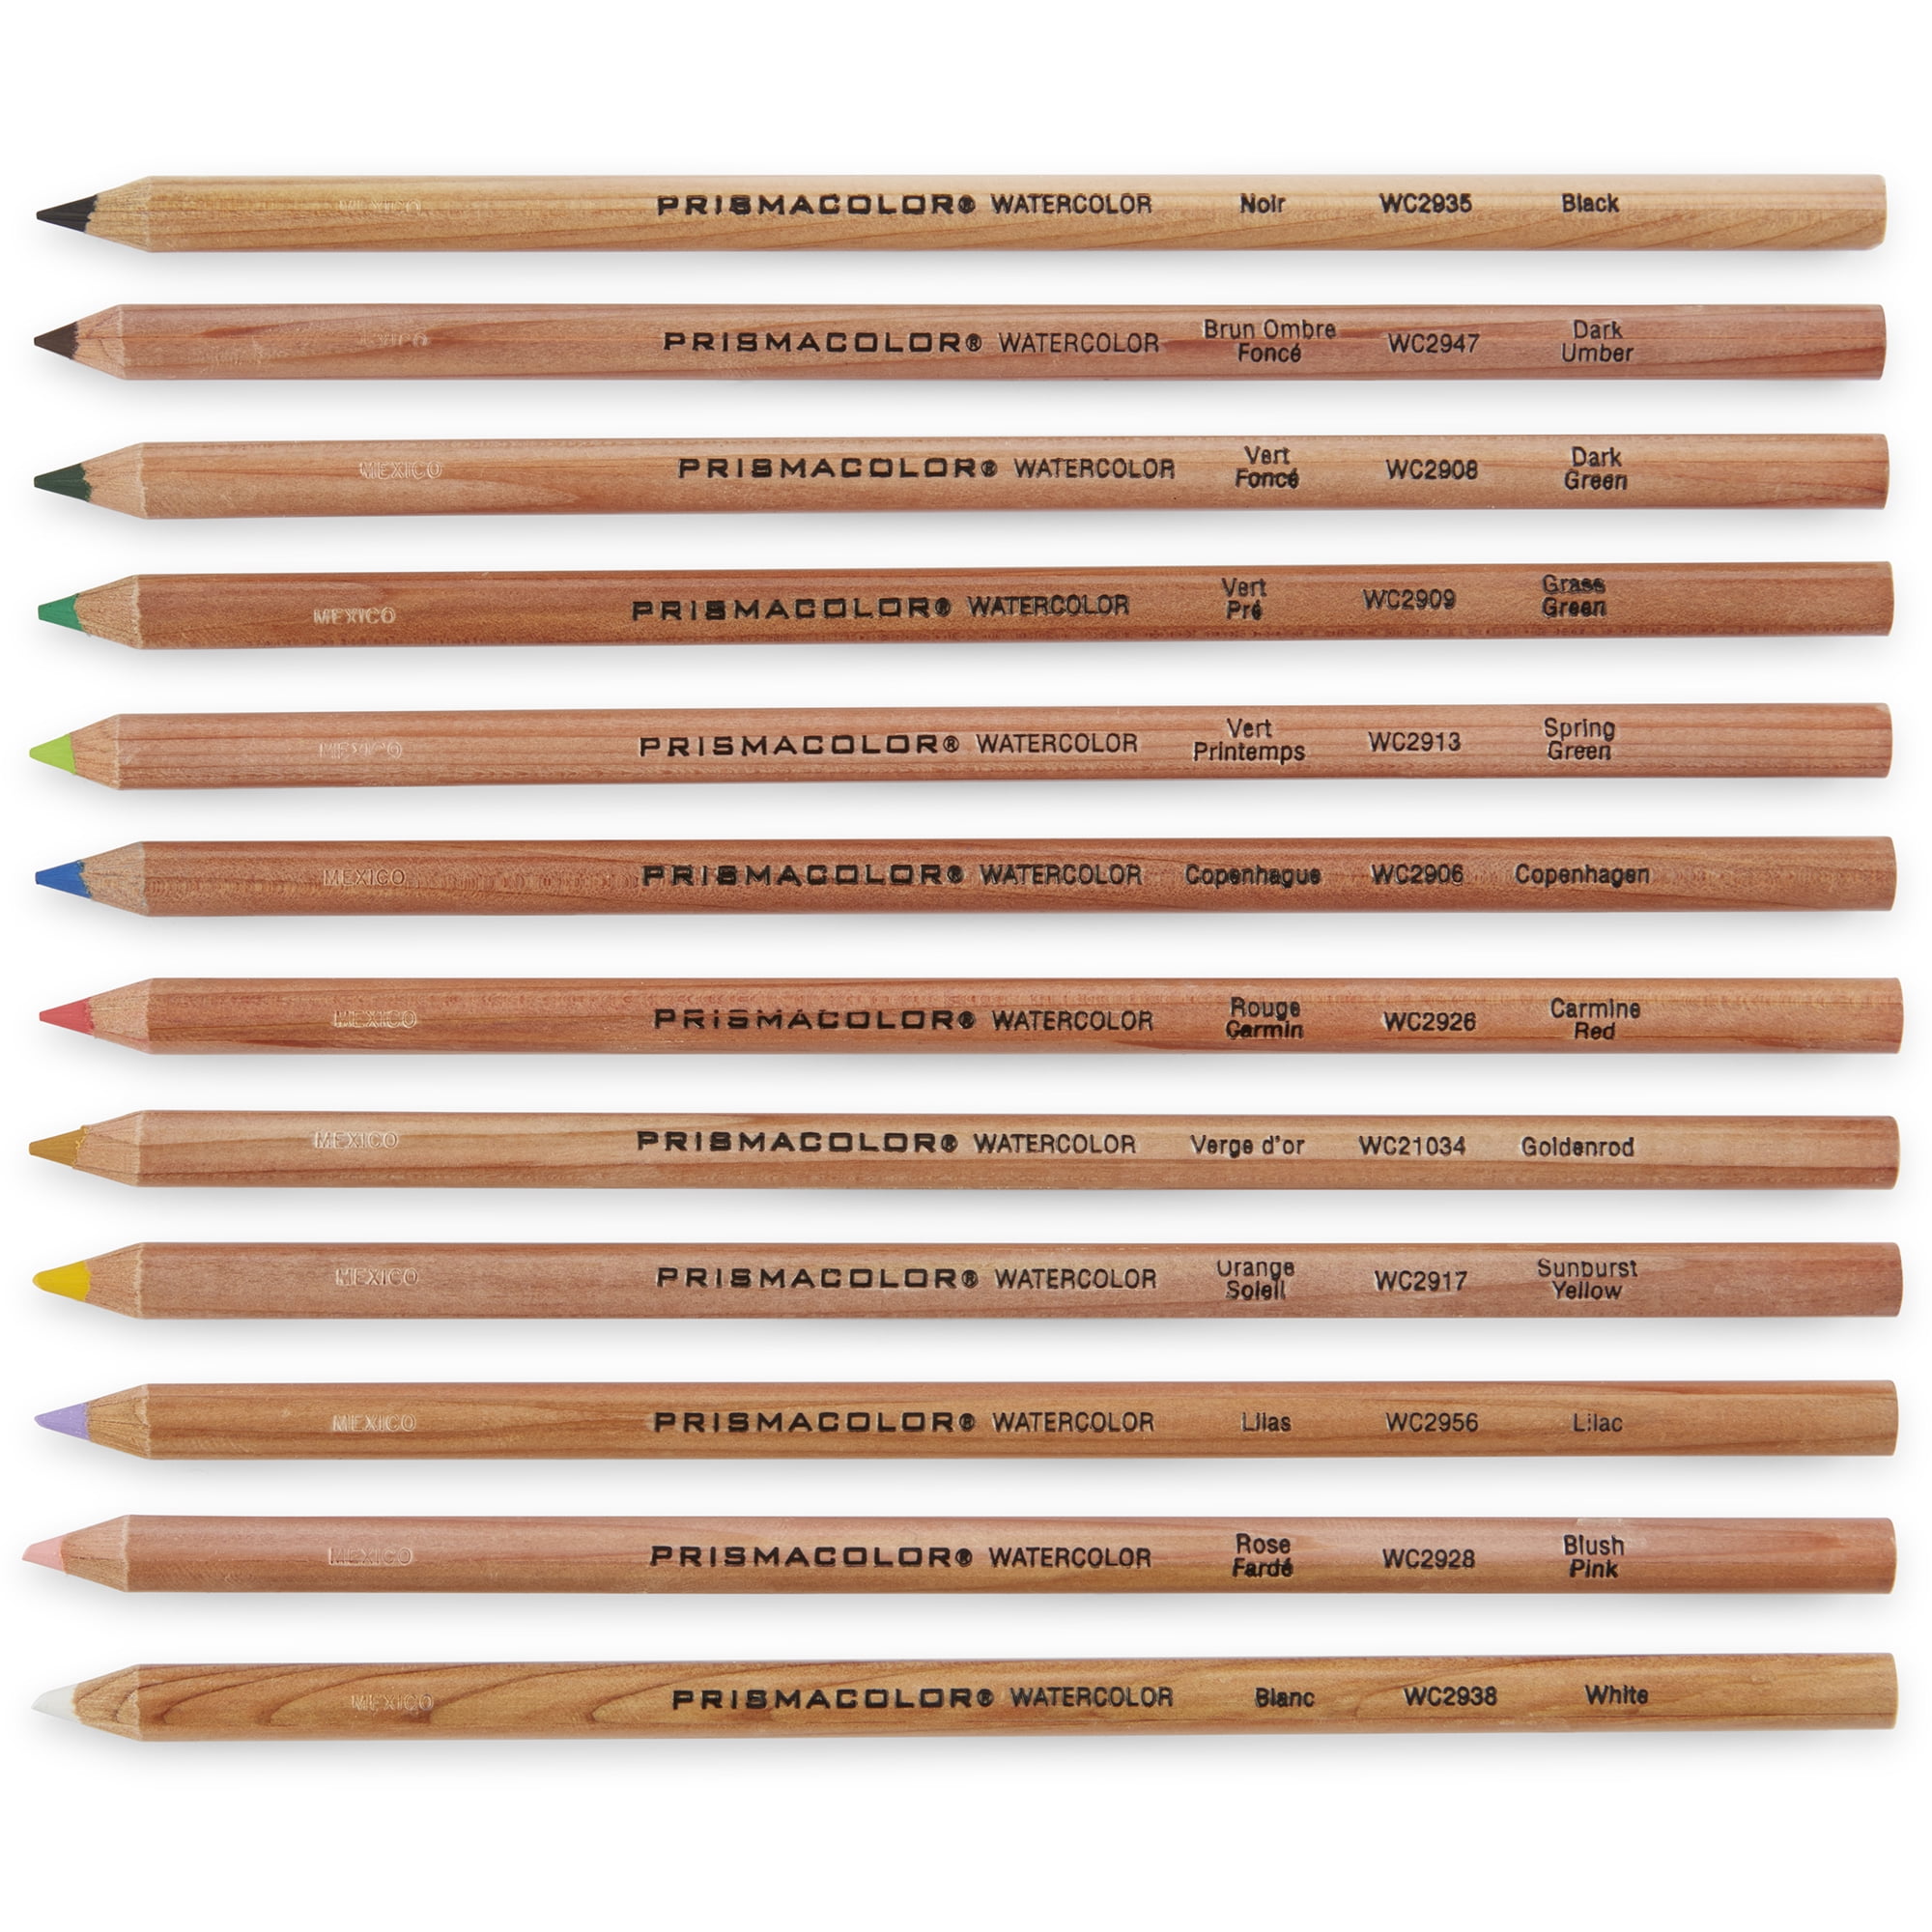 NEW Prismacolor® Premier Water-Soluble Watercolor Pencils 24 Colors in Tin